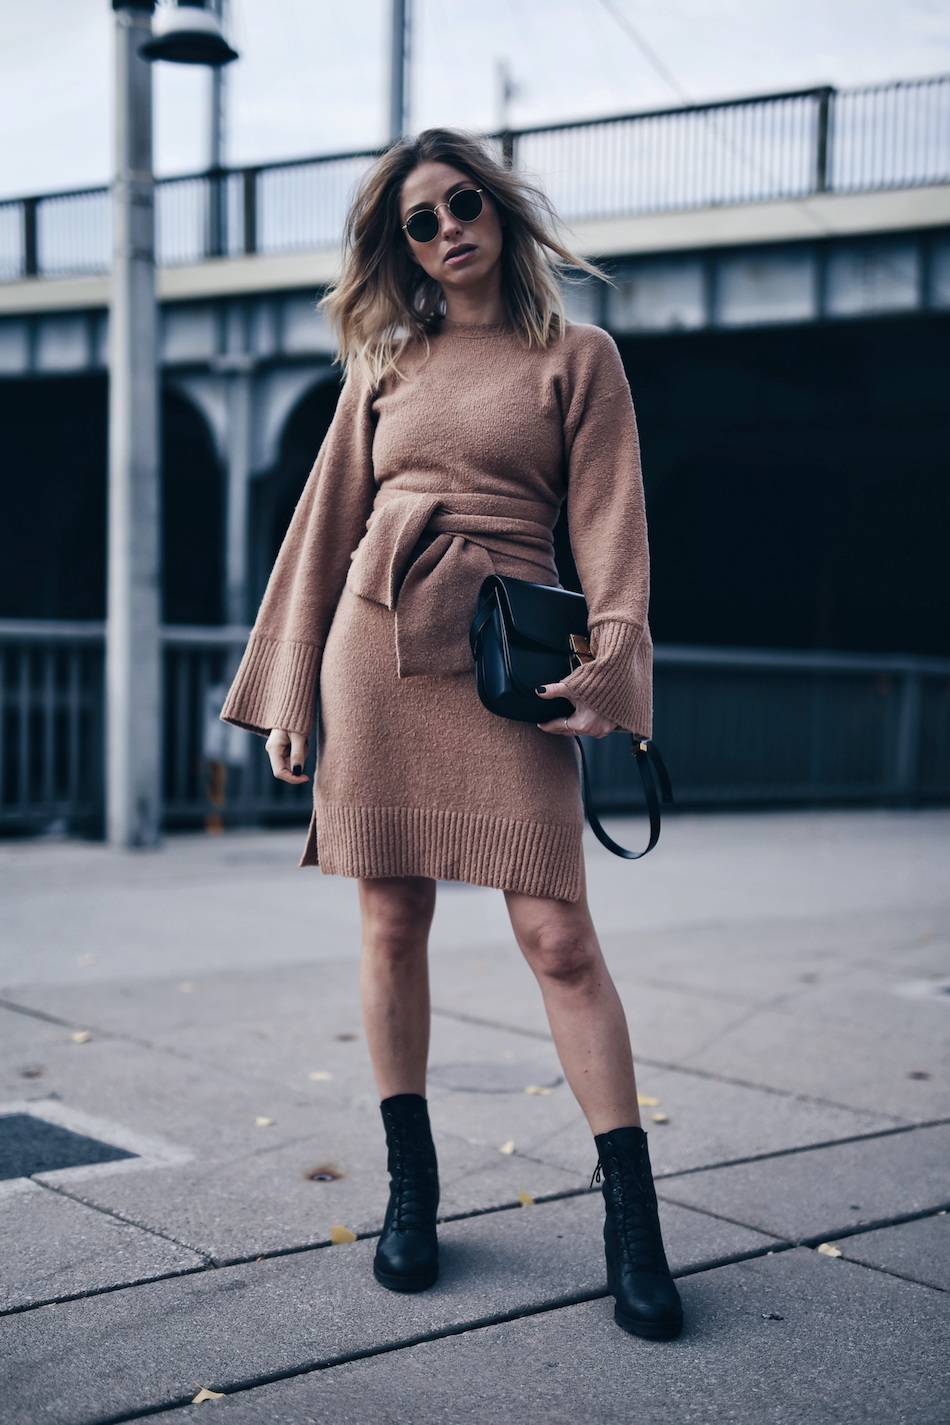 KNIT DRESS AND COMBAT BOOTS | The 